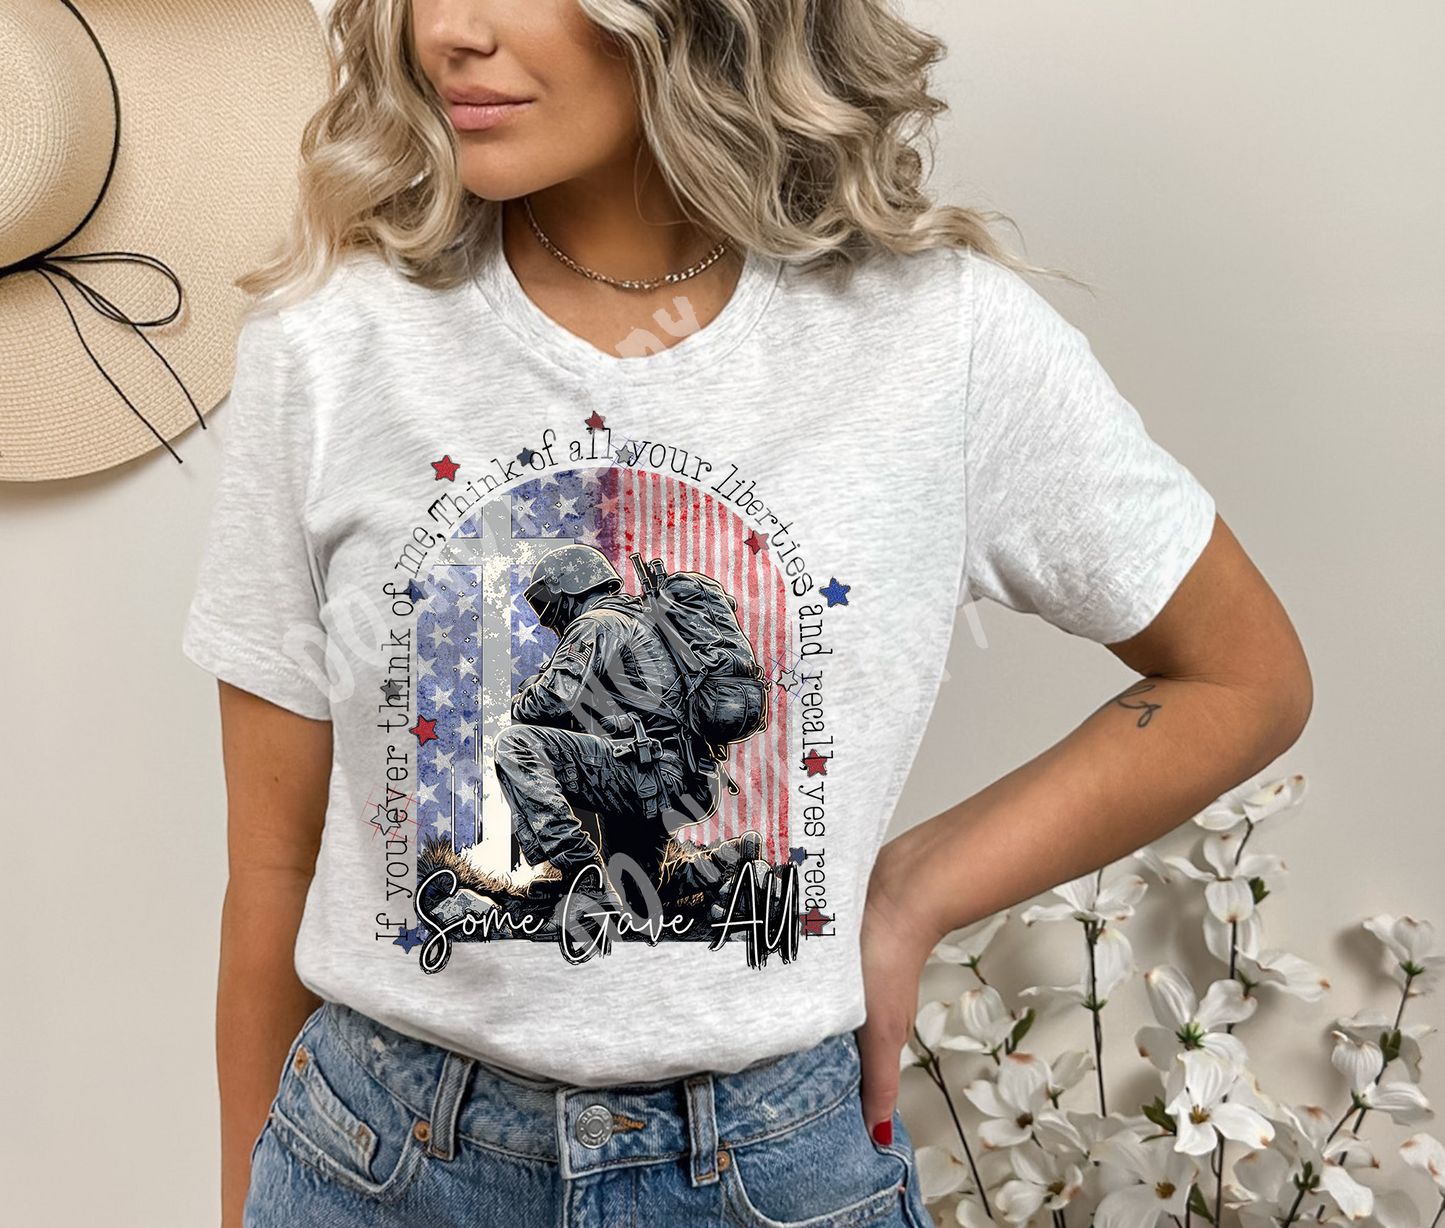 SOME GAVE ALL TEE